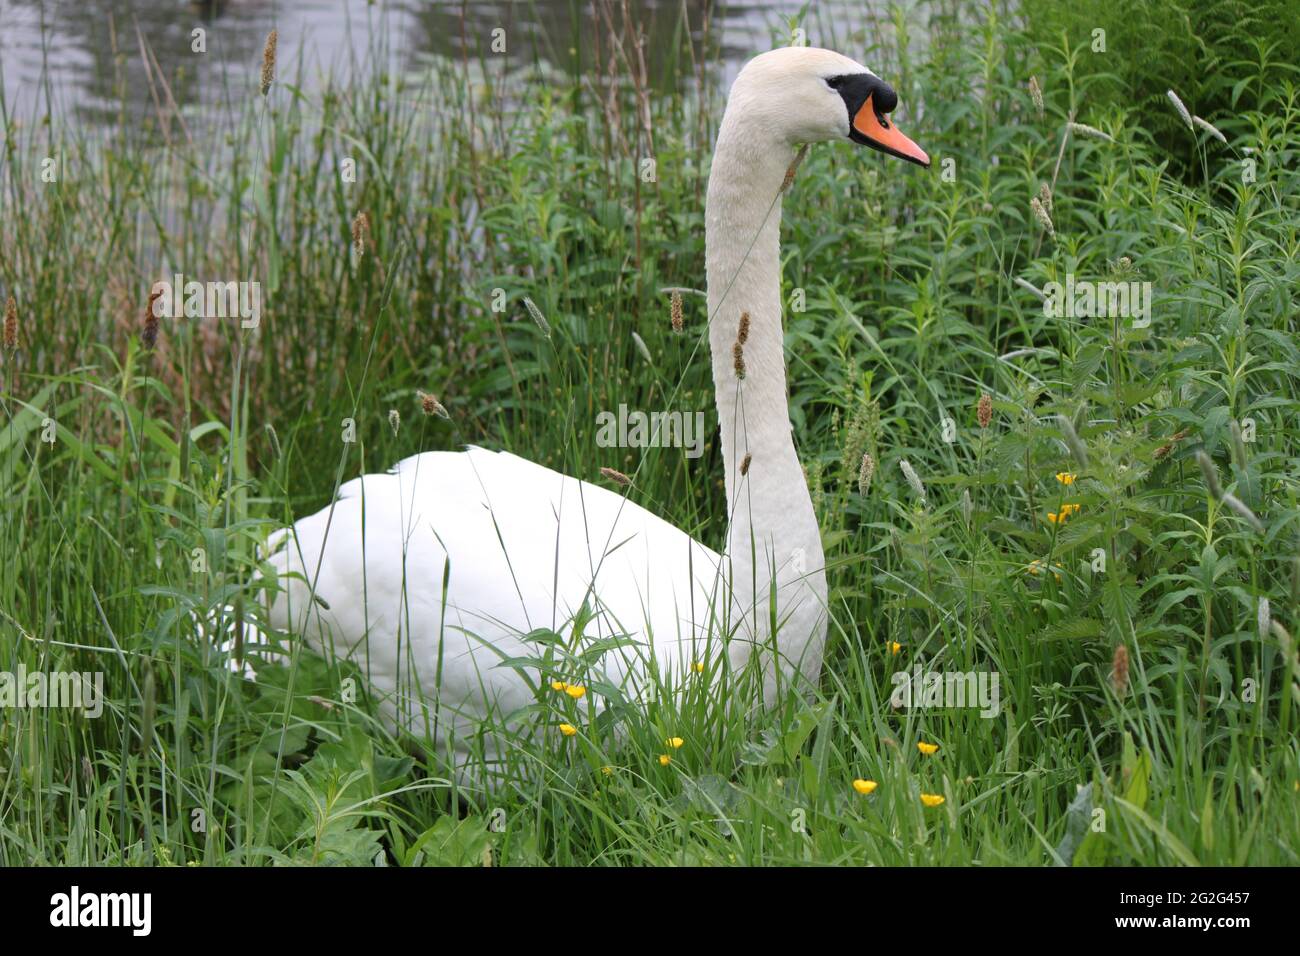 Beautiful large swan (Cygnus Olor) sitting in tall green grass. Mute swan thriving in urban space, Scottish wildlife living in green spaces. Stock Photo